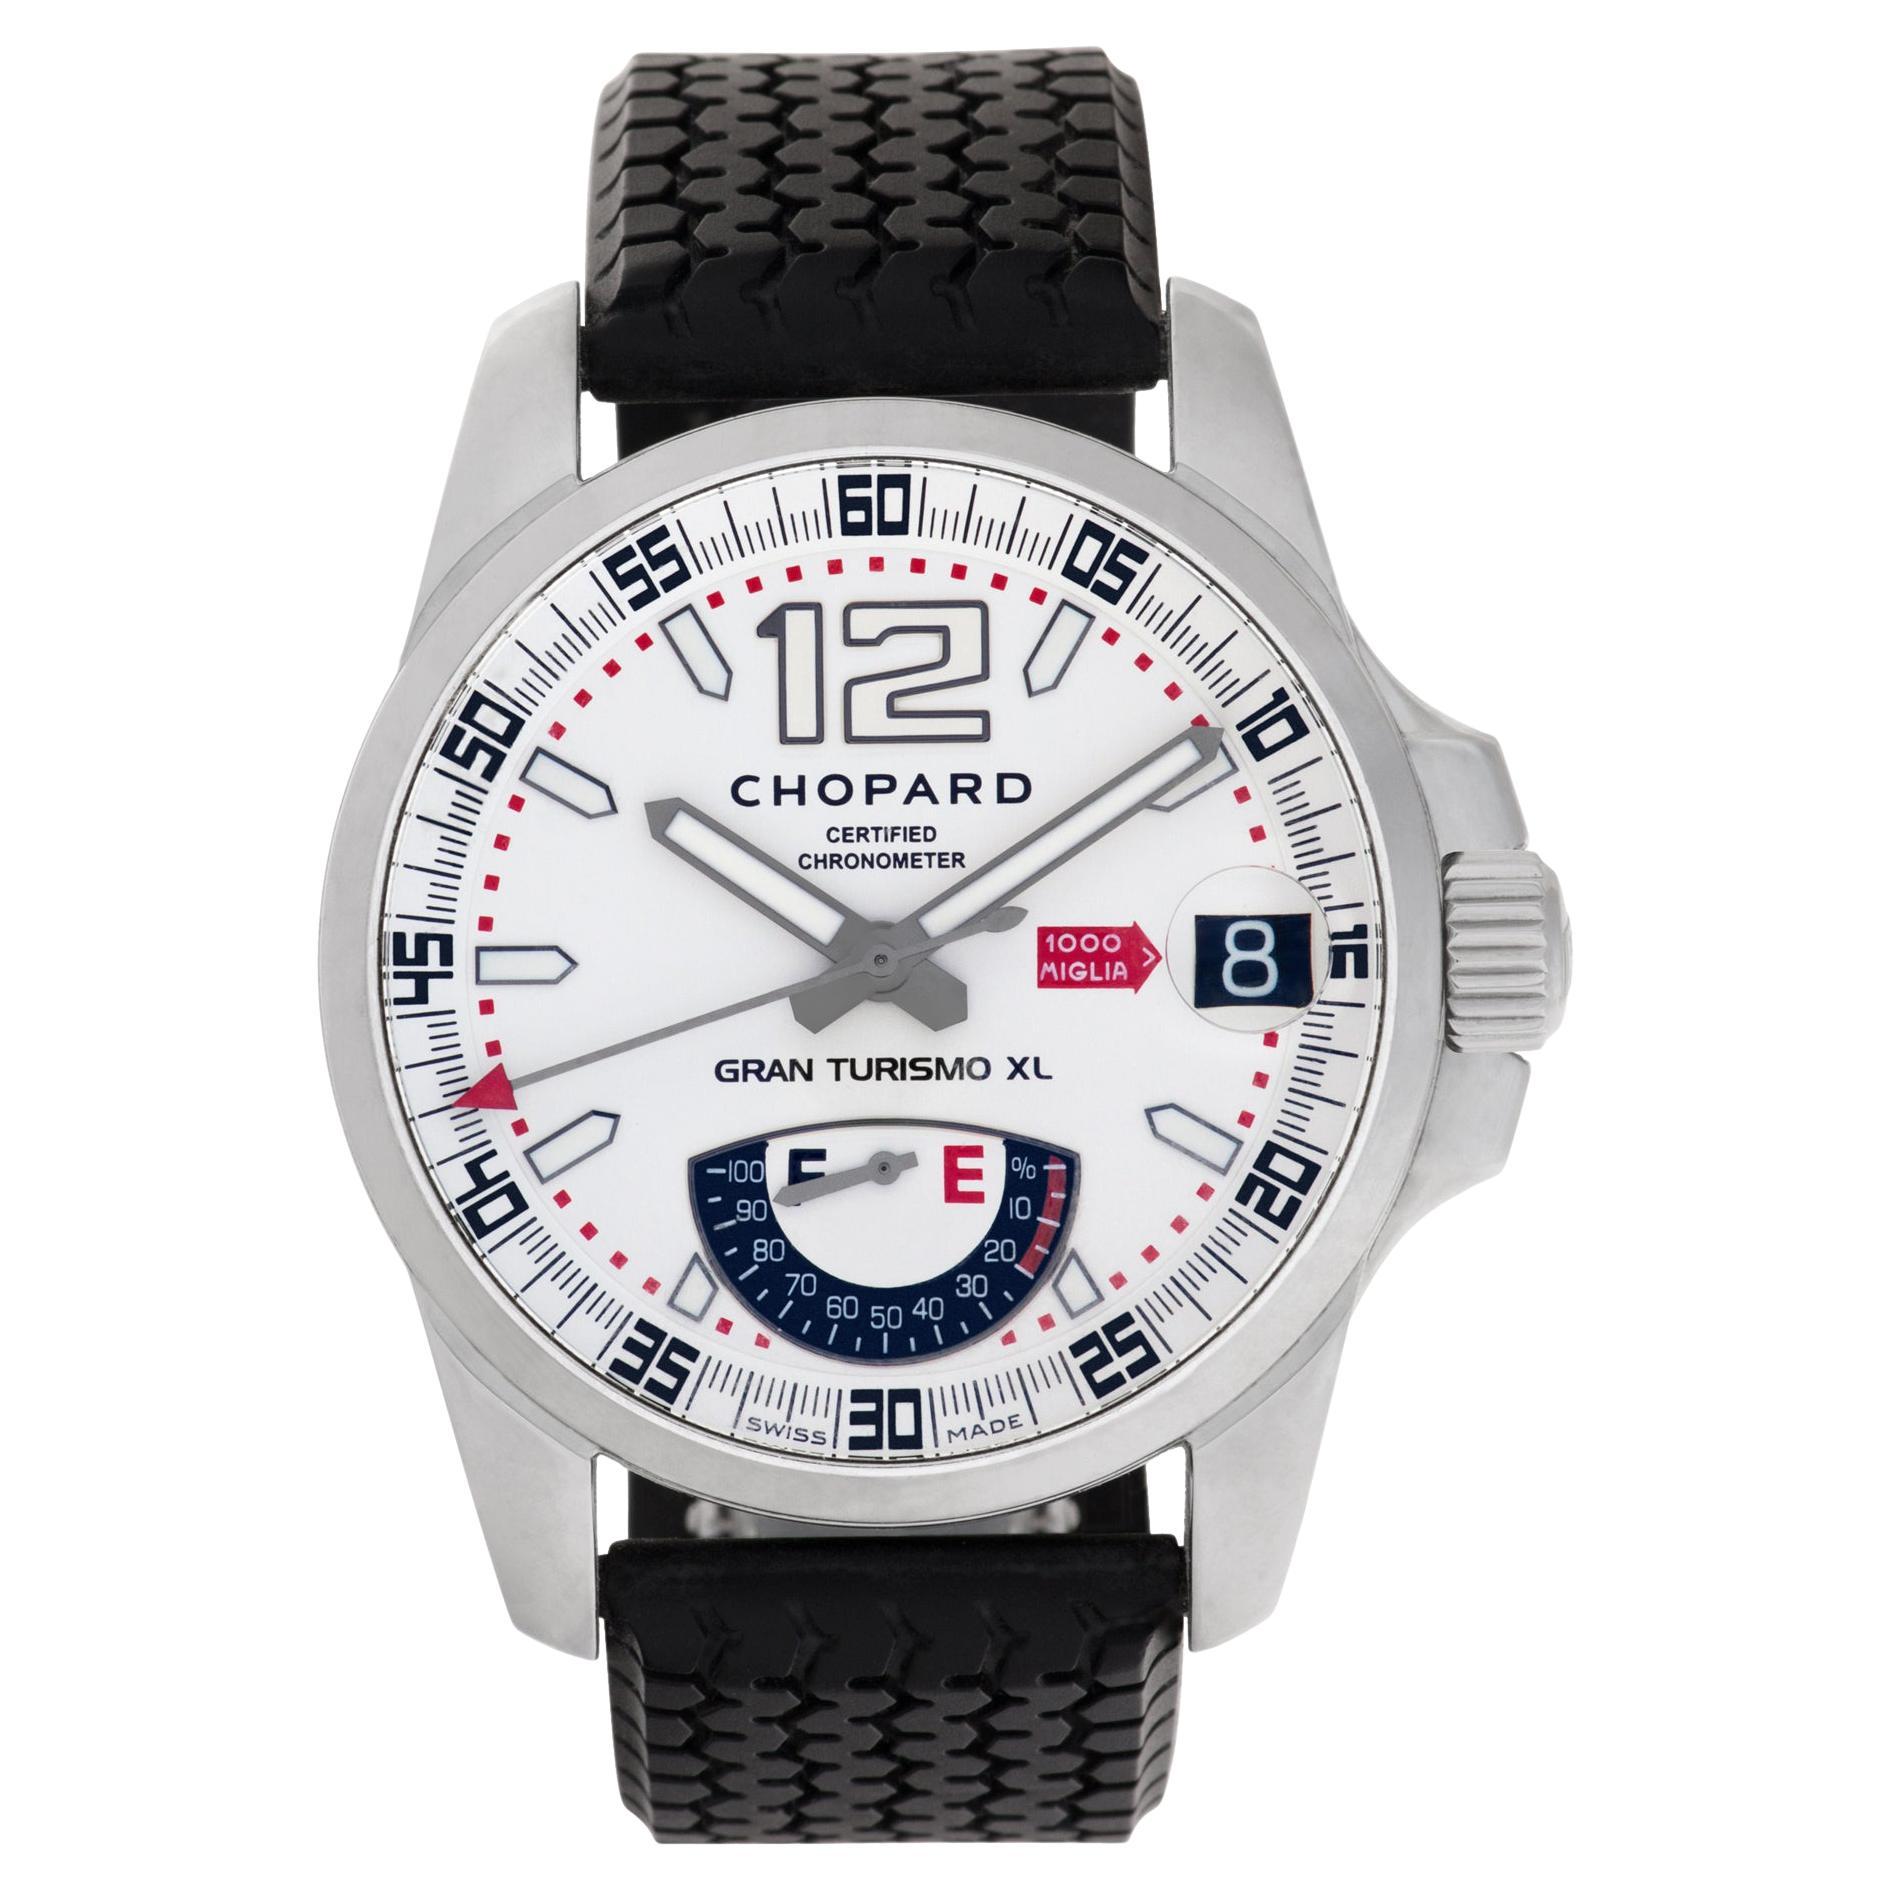 Chopard Mille Miglia Ref. 8997 Watch in Stainless Steel on a Rubber Strap